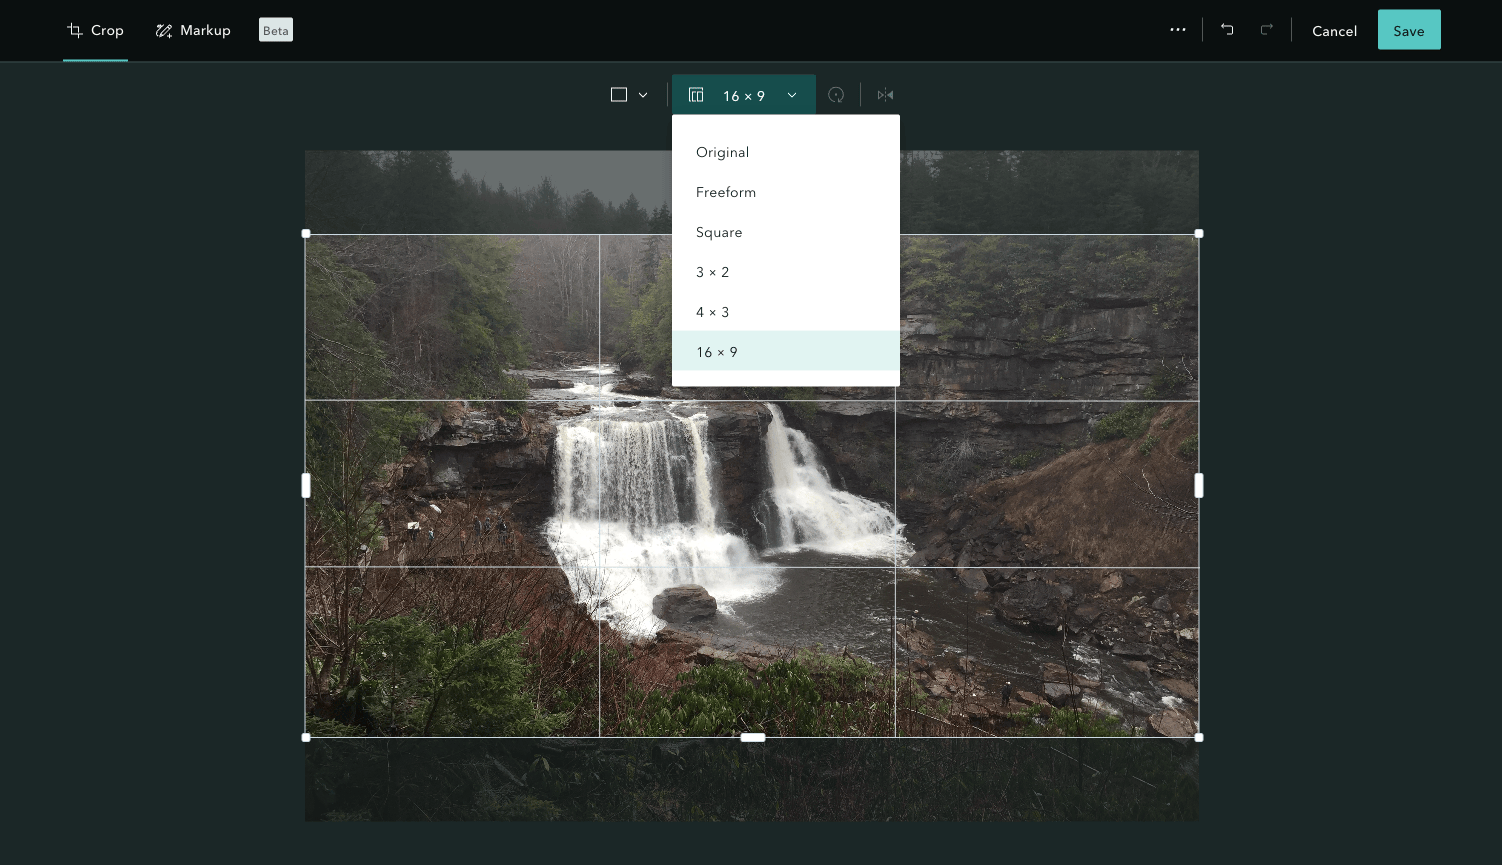 A screenshot of the image editor in ArcGIS StoryMaps open to the Crop tab